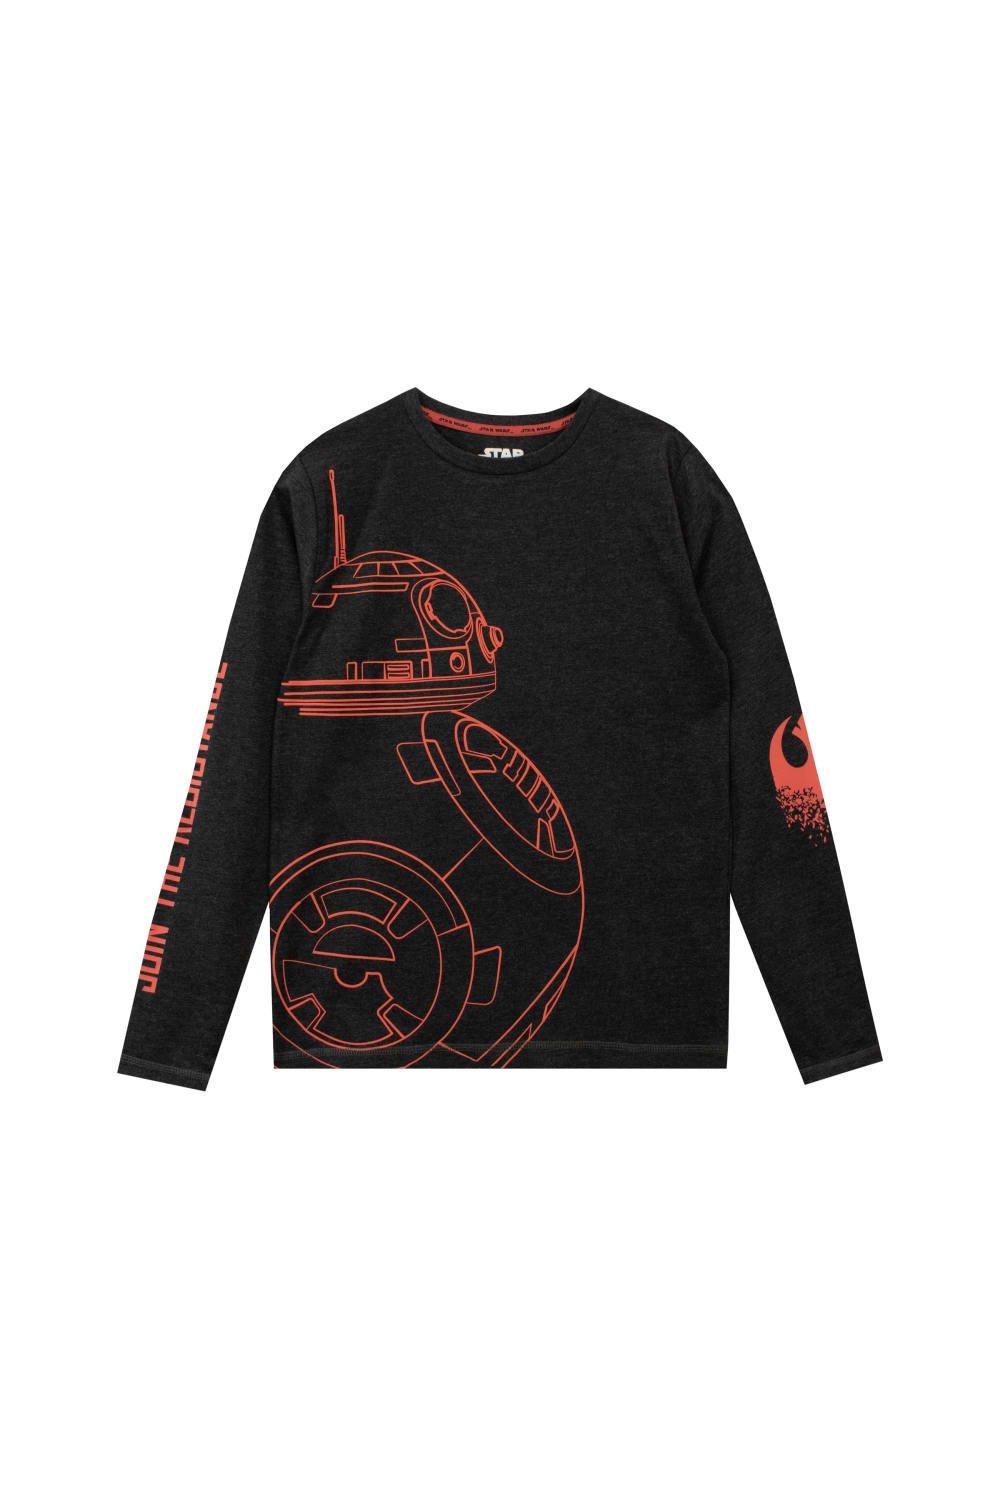 Join the Resistance BB8 Long Sleeve Top